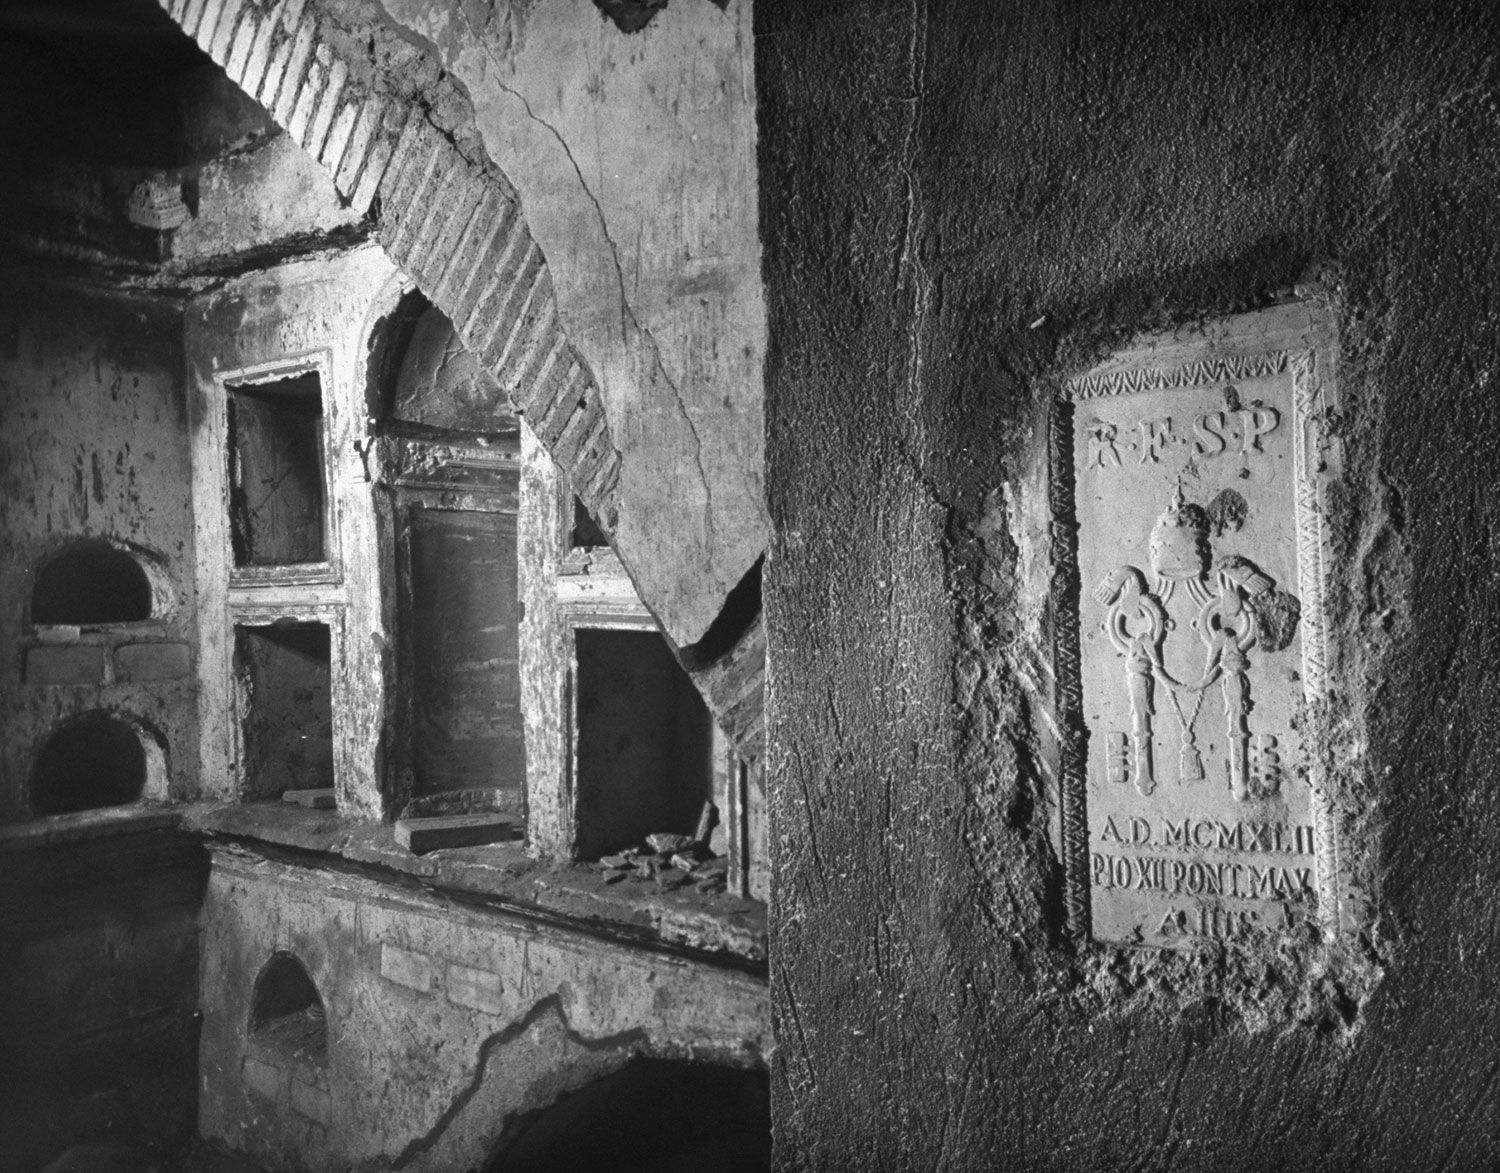 The oldest burial chamber found during the excavation beneath St. Peter's in Rome, 1950.